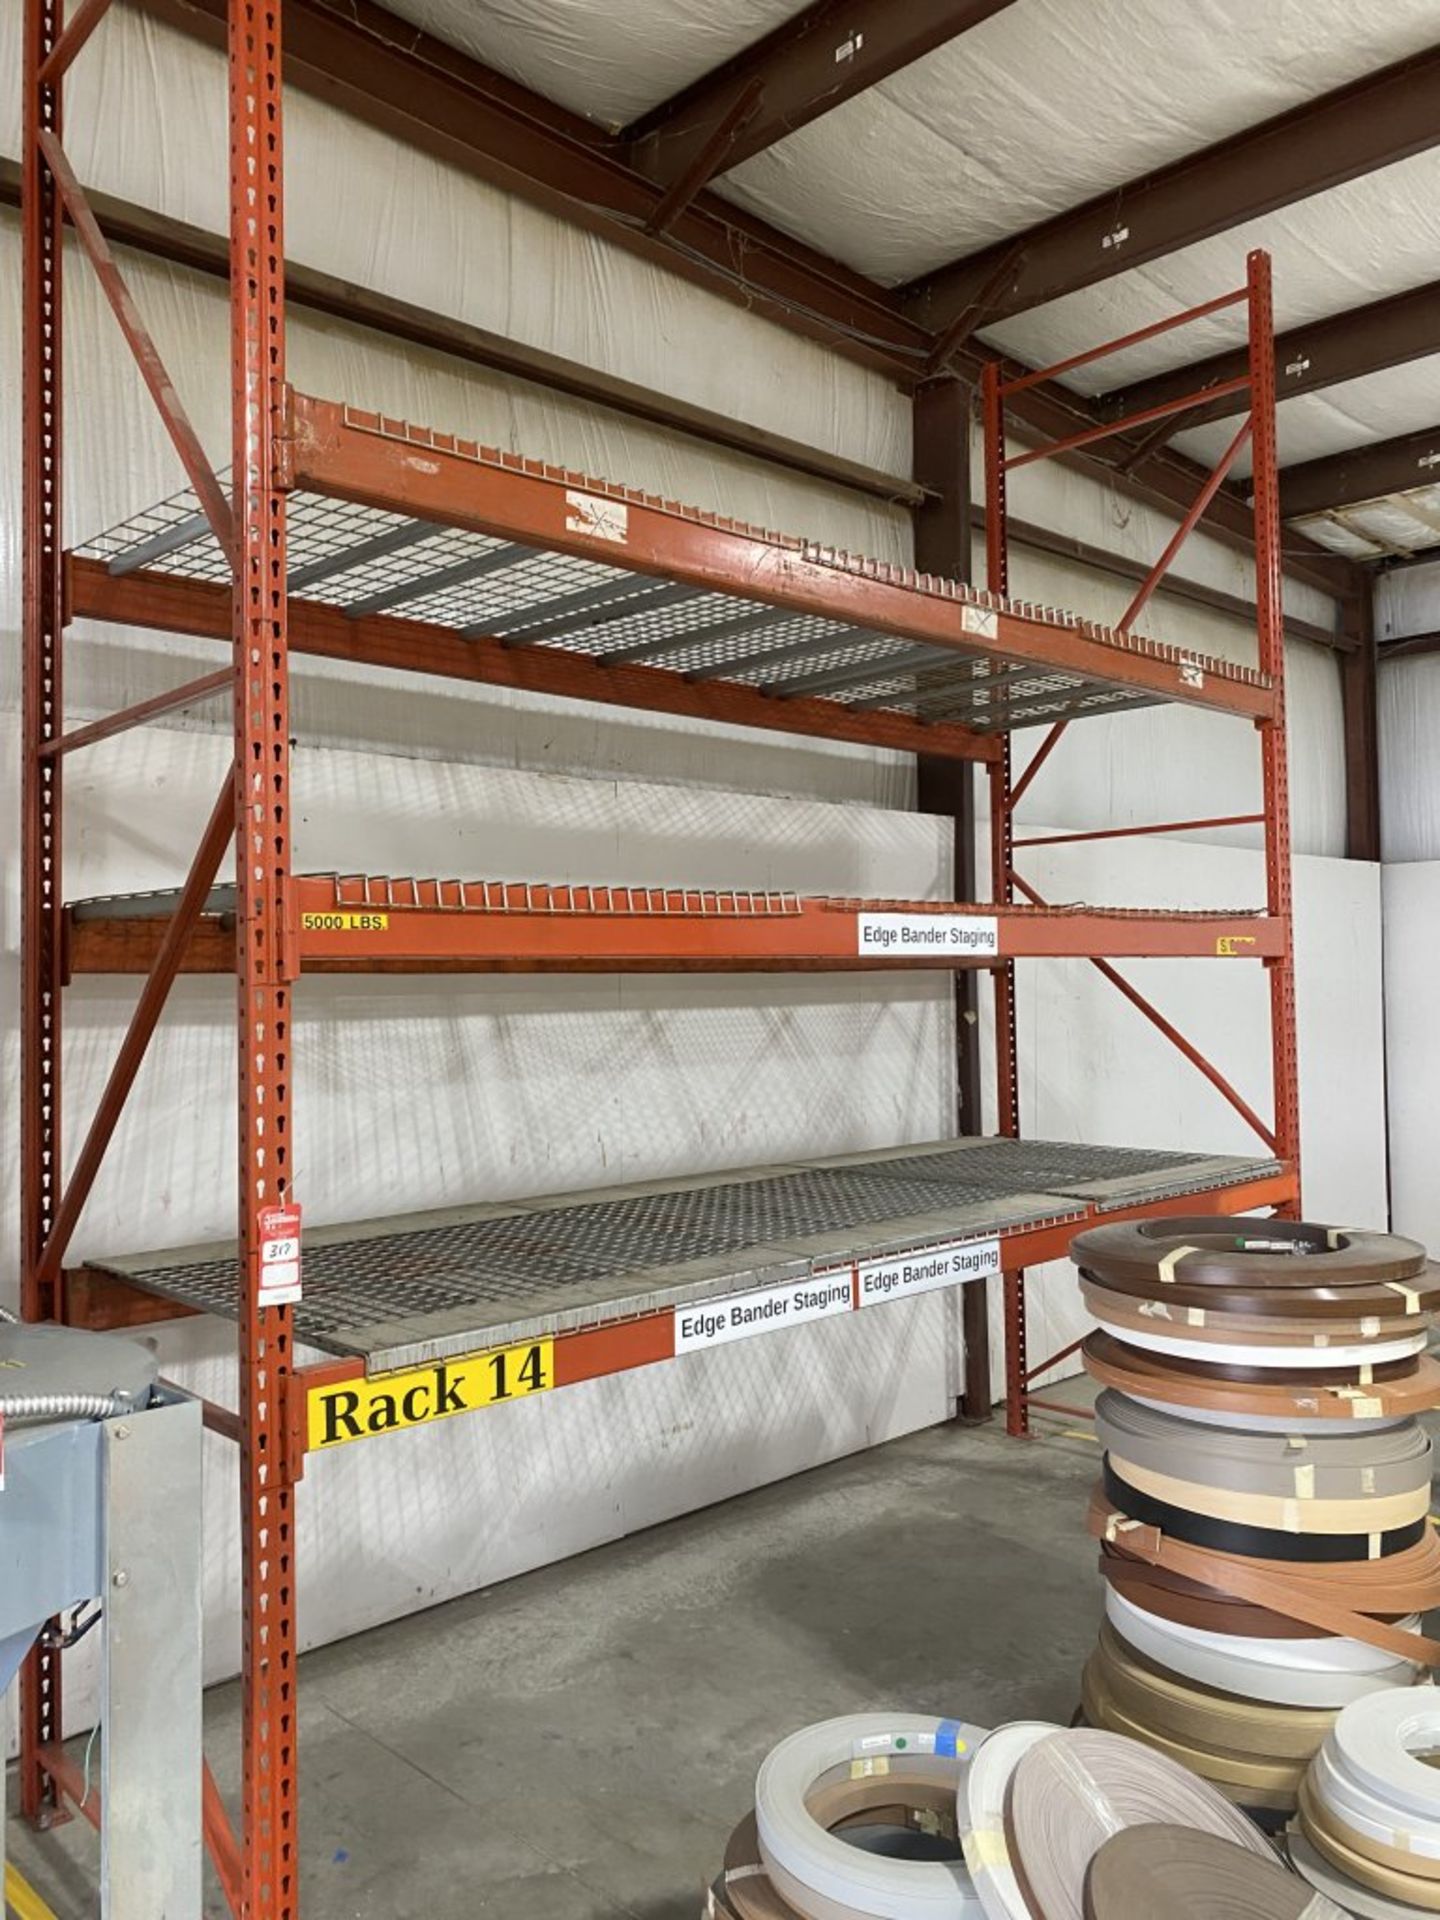 PALLET RACKING (2) 14' X 48'' UPRIGHTS, (6) 12' CROSS BEAMS, WITH (9) METAL DECK SECTIONS